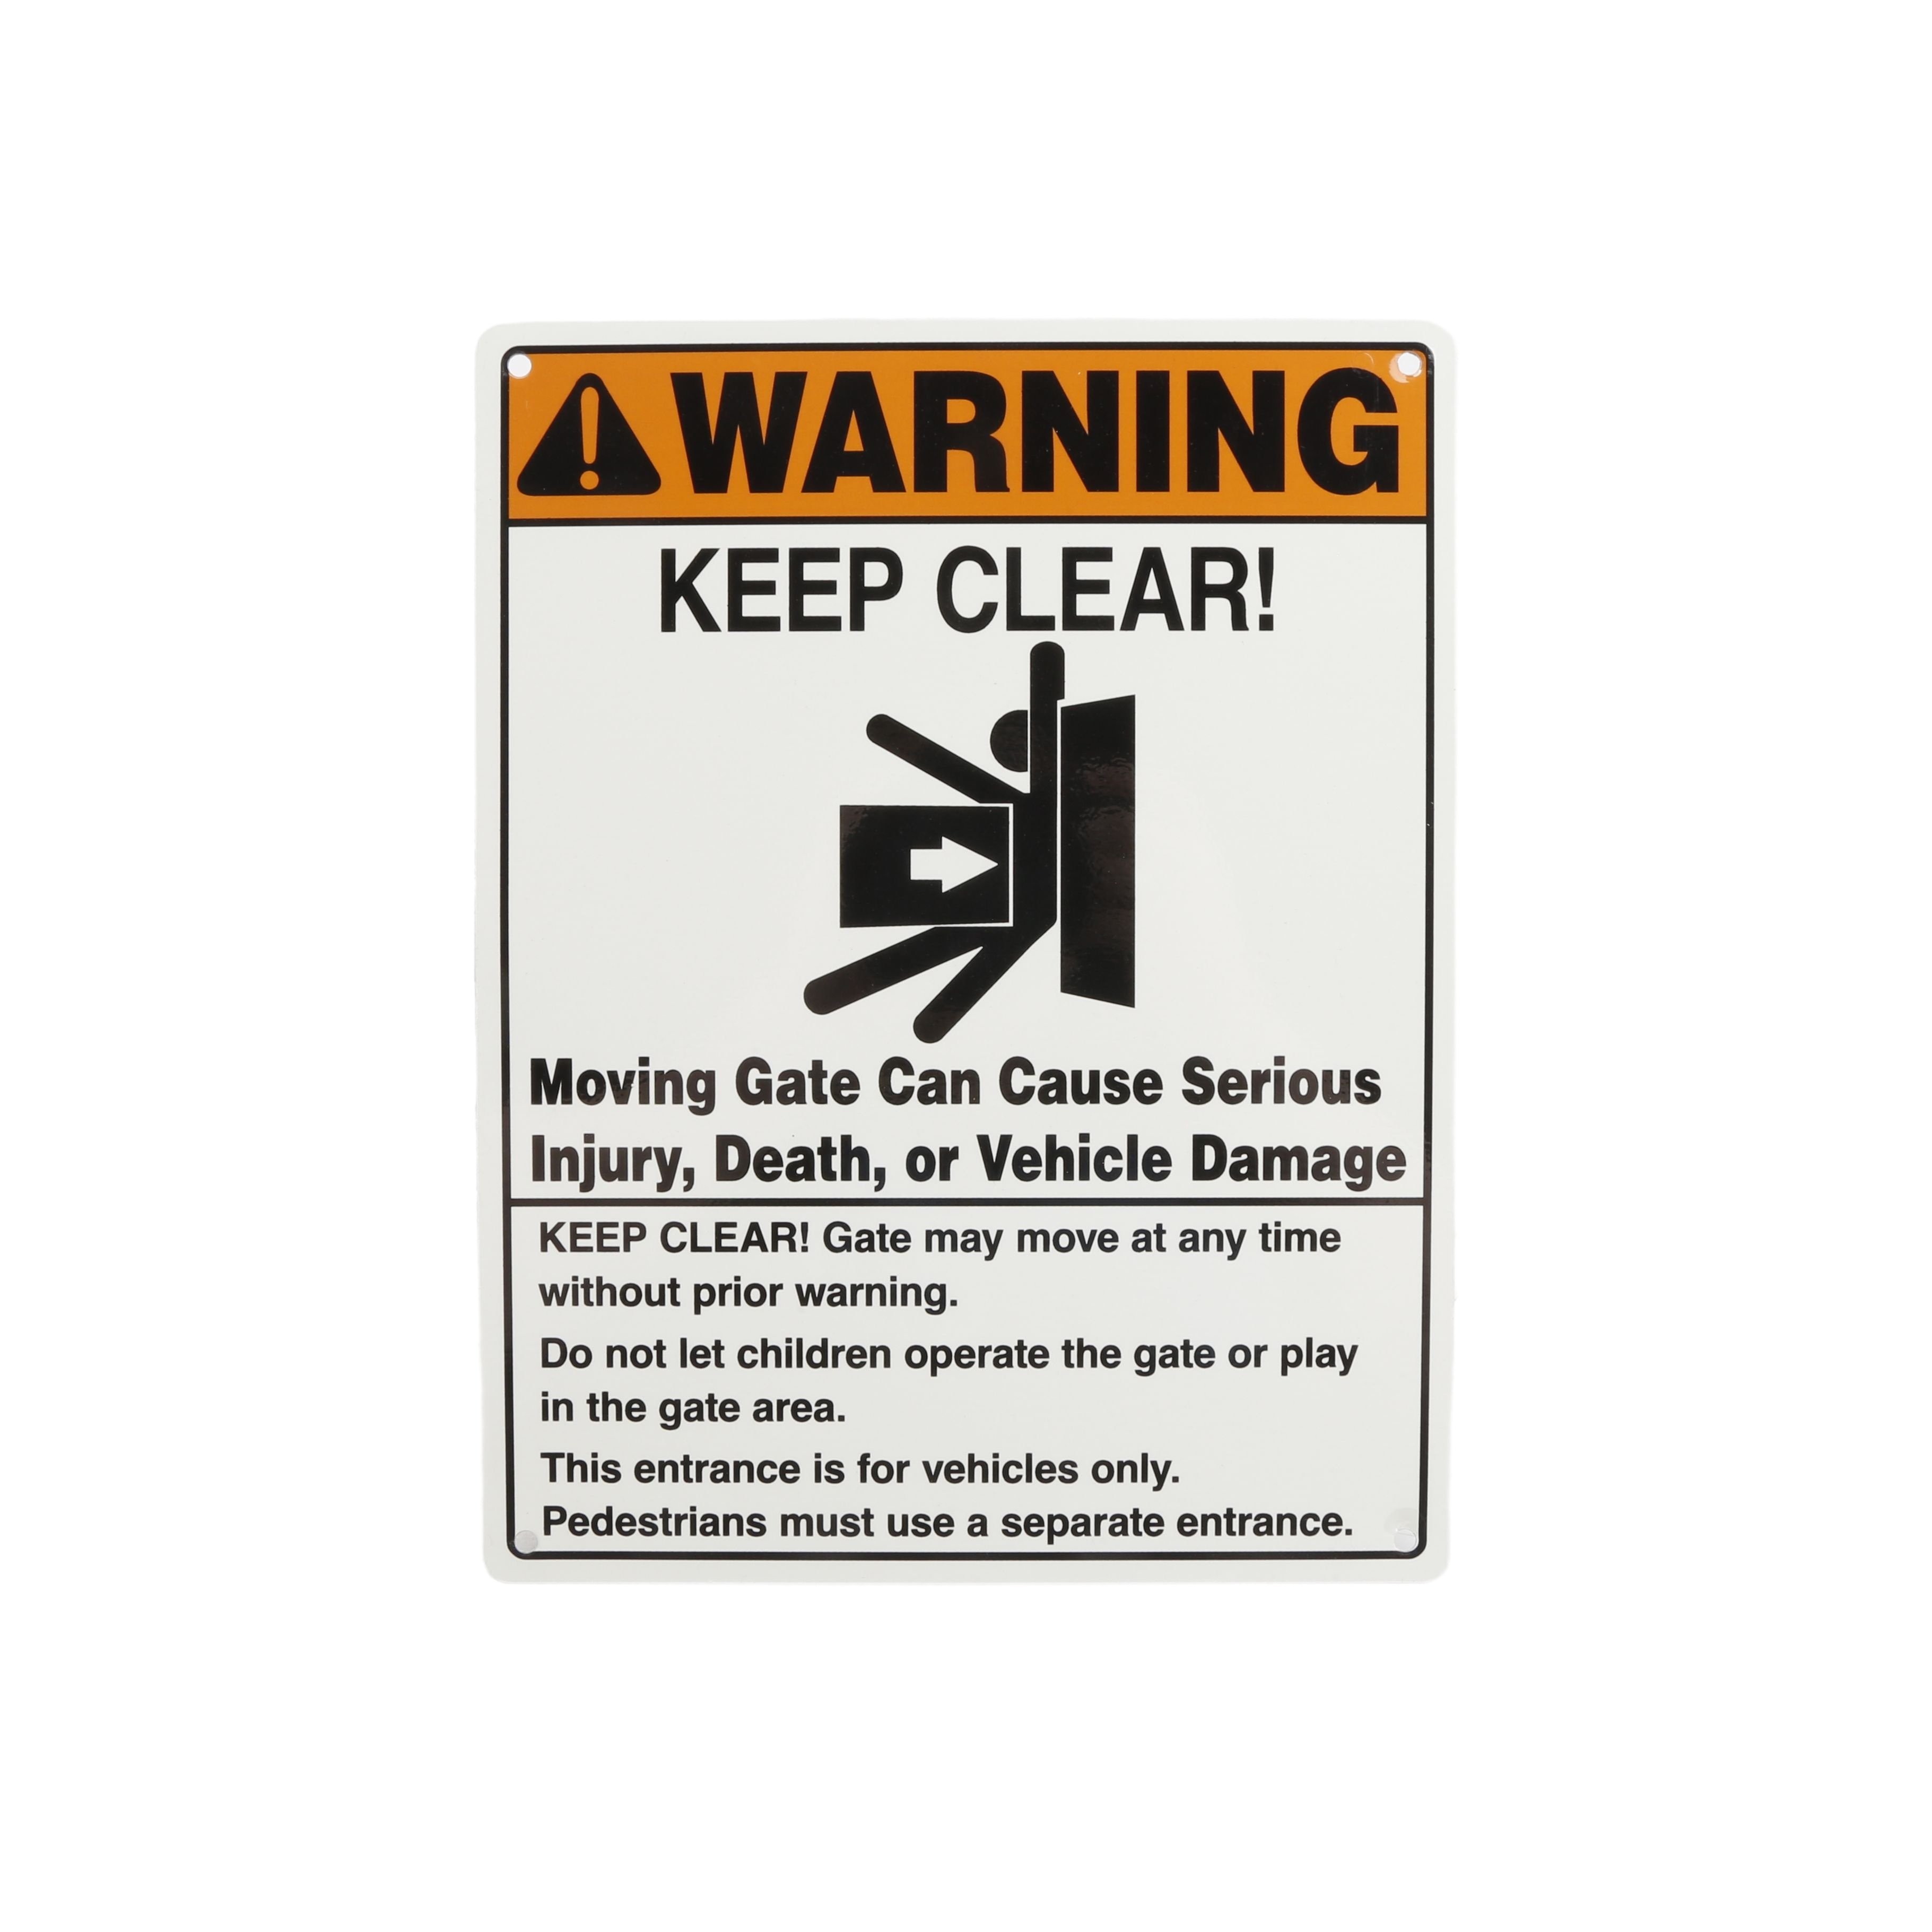 Gate Warning Signs & Automatic Gate Signs: Prevent Accidents